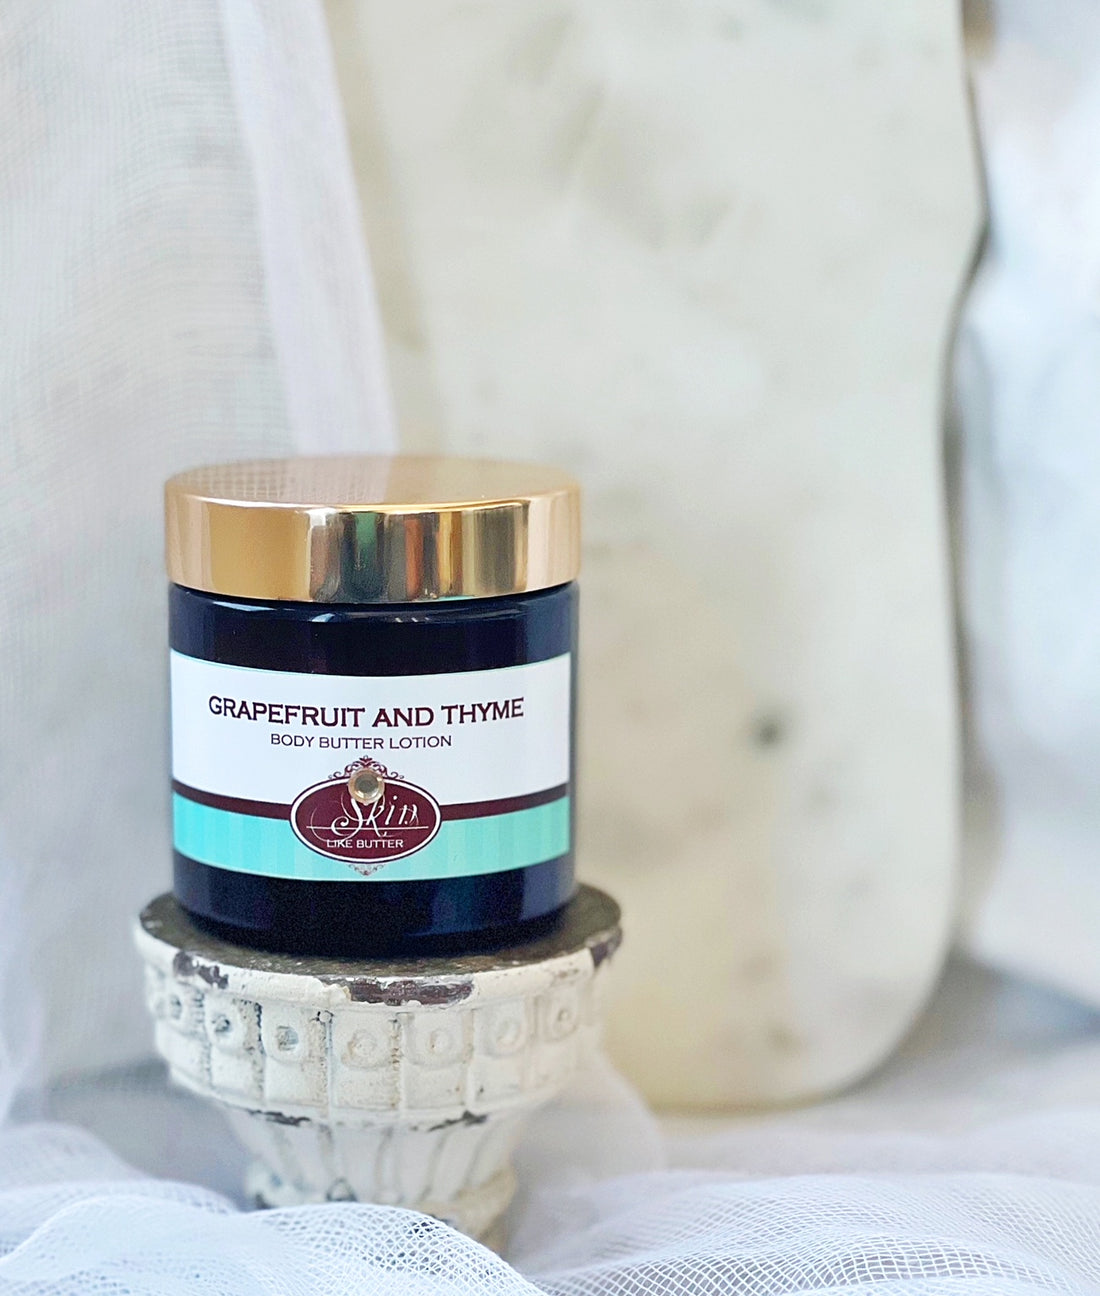 SMOKING JACKET scented water free, vegan non-greasy Body Butter